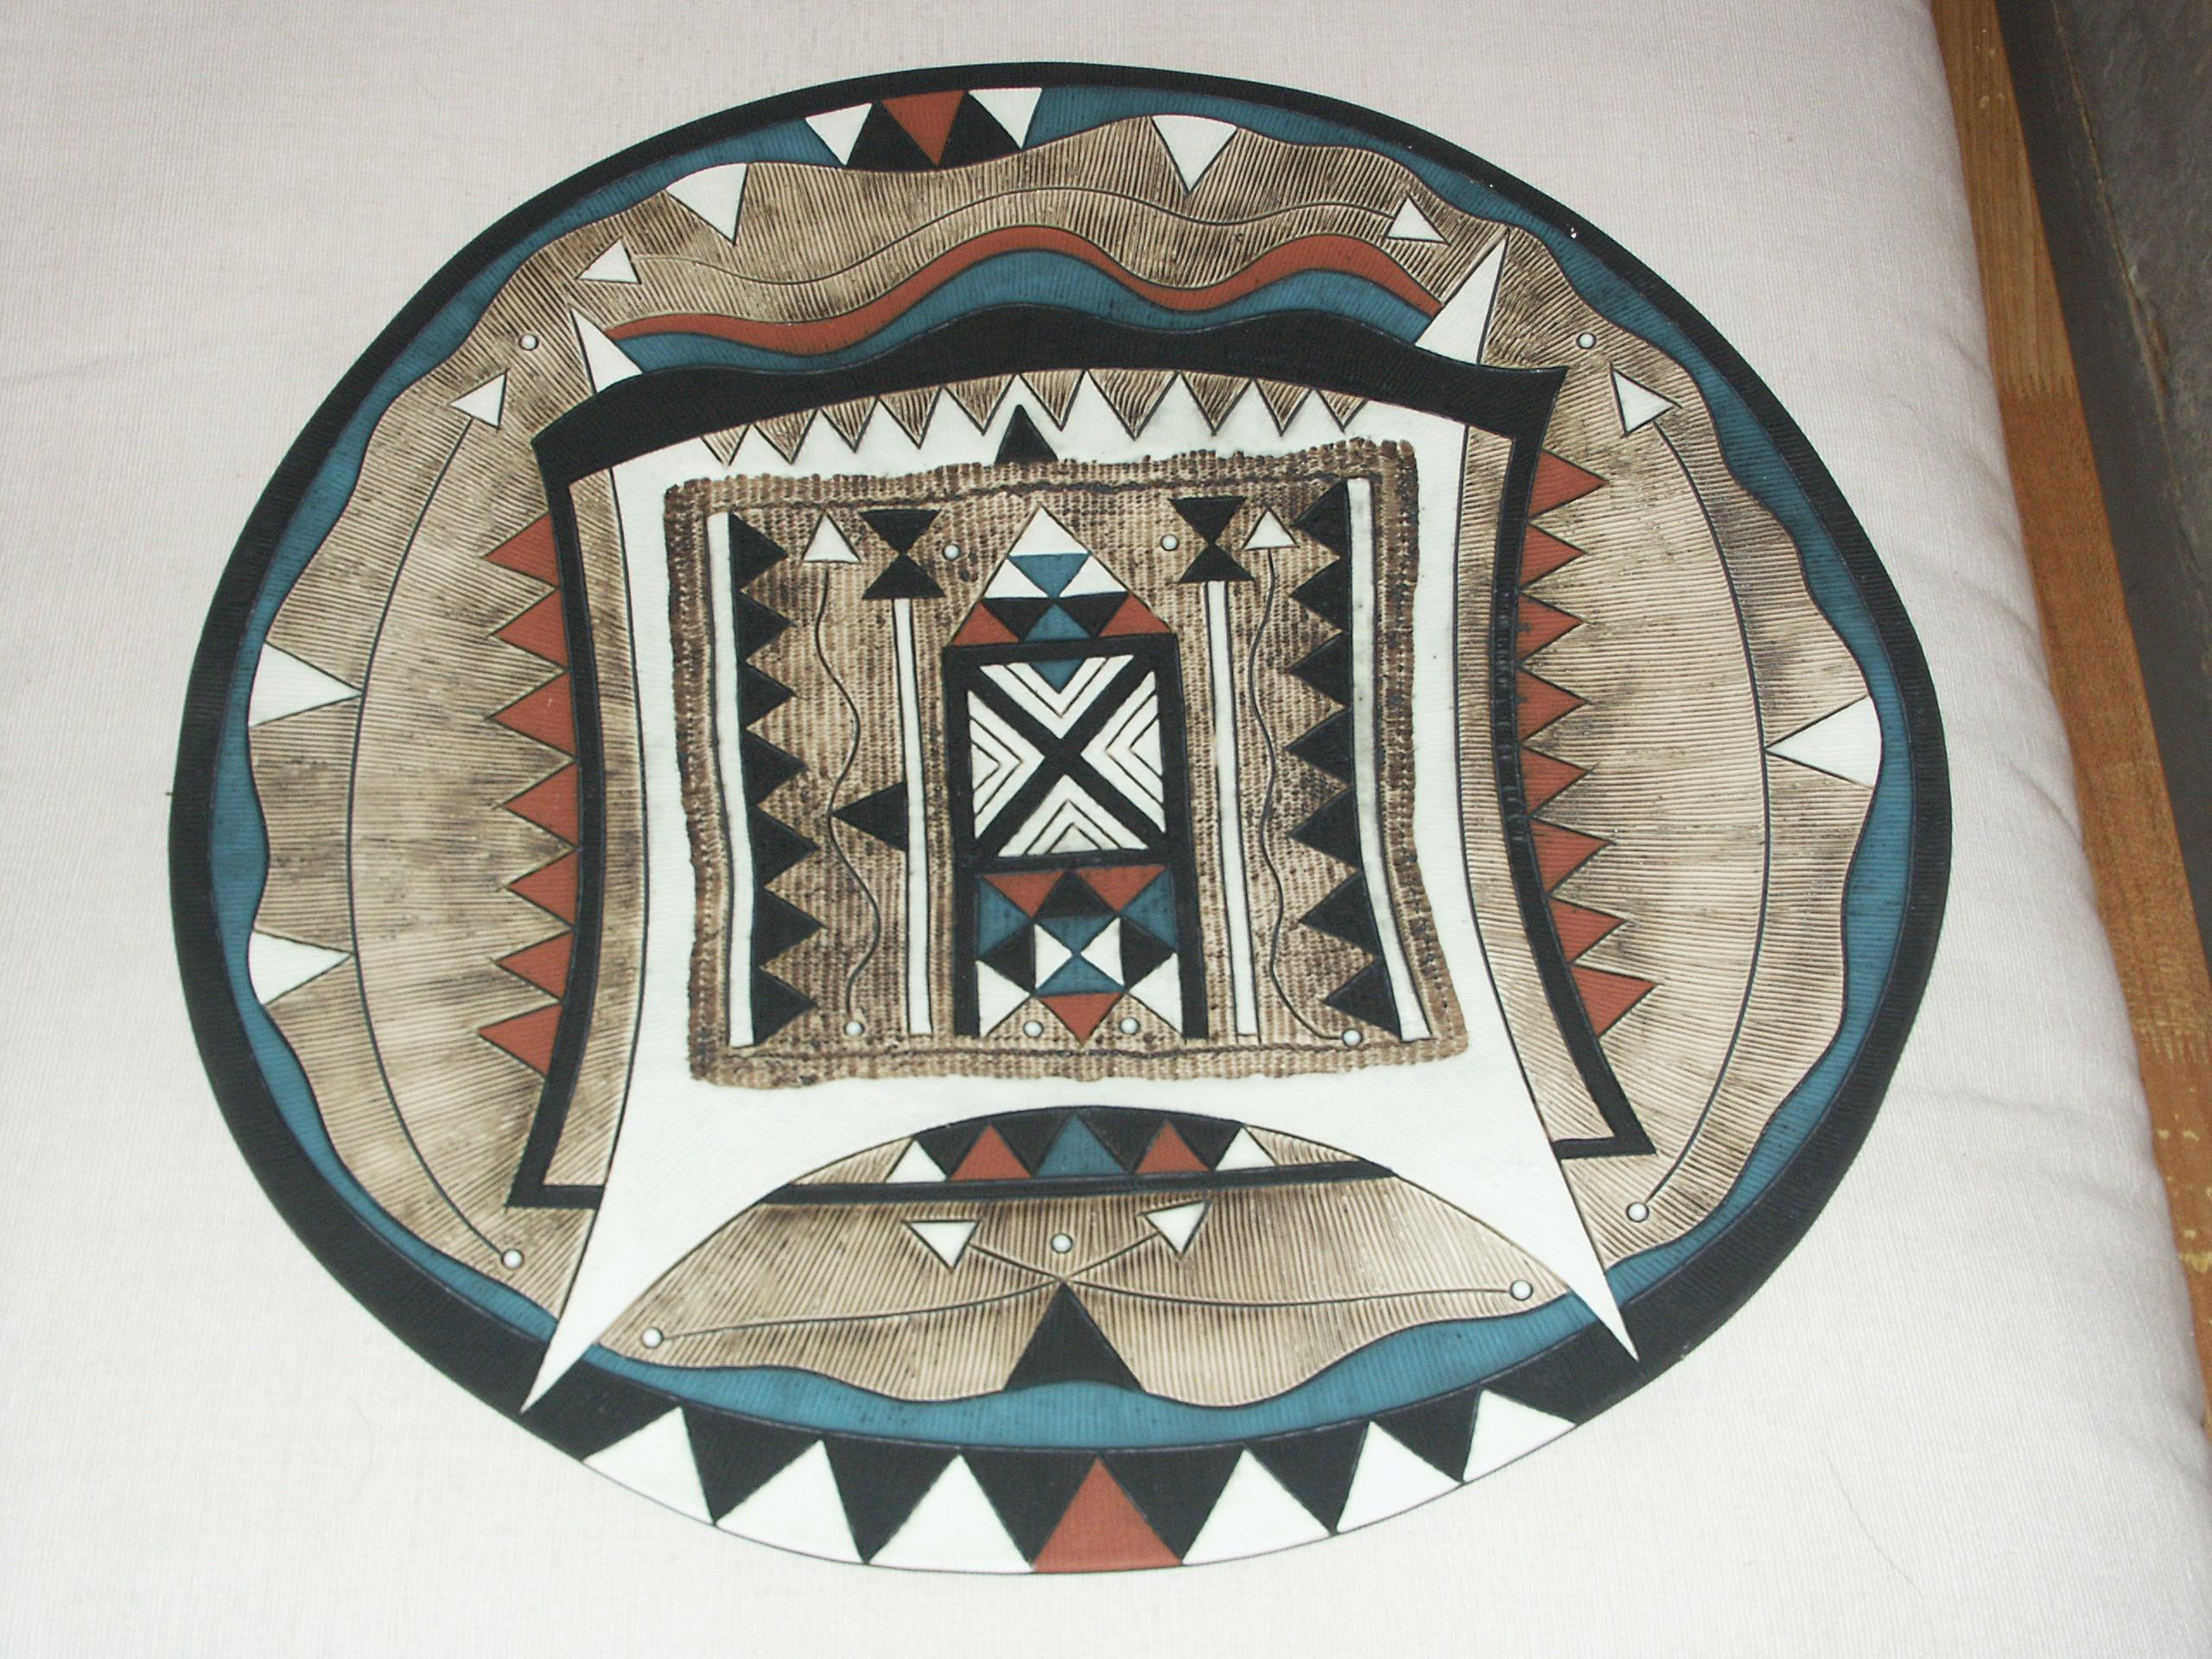 Rodney Alan Blumenfeld South African B.1953.
Round earthenware platter, 1995.
Earthenware clay, press moulded, with metalic oxides and matt glazes.
 
 Rodney Alan Blumenfeld South African B.1953. creates deeply textured, sensual and motif-laden